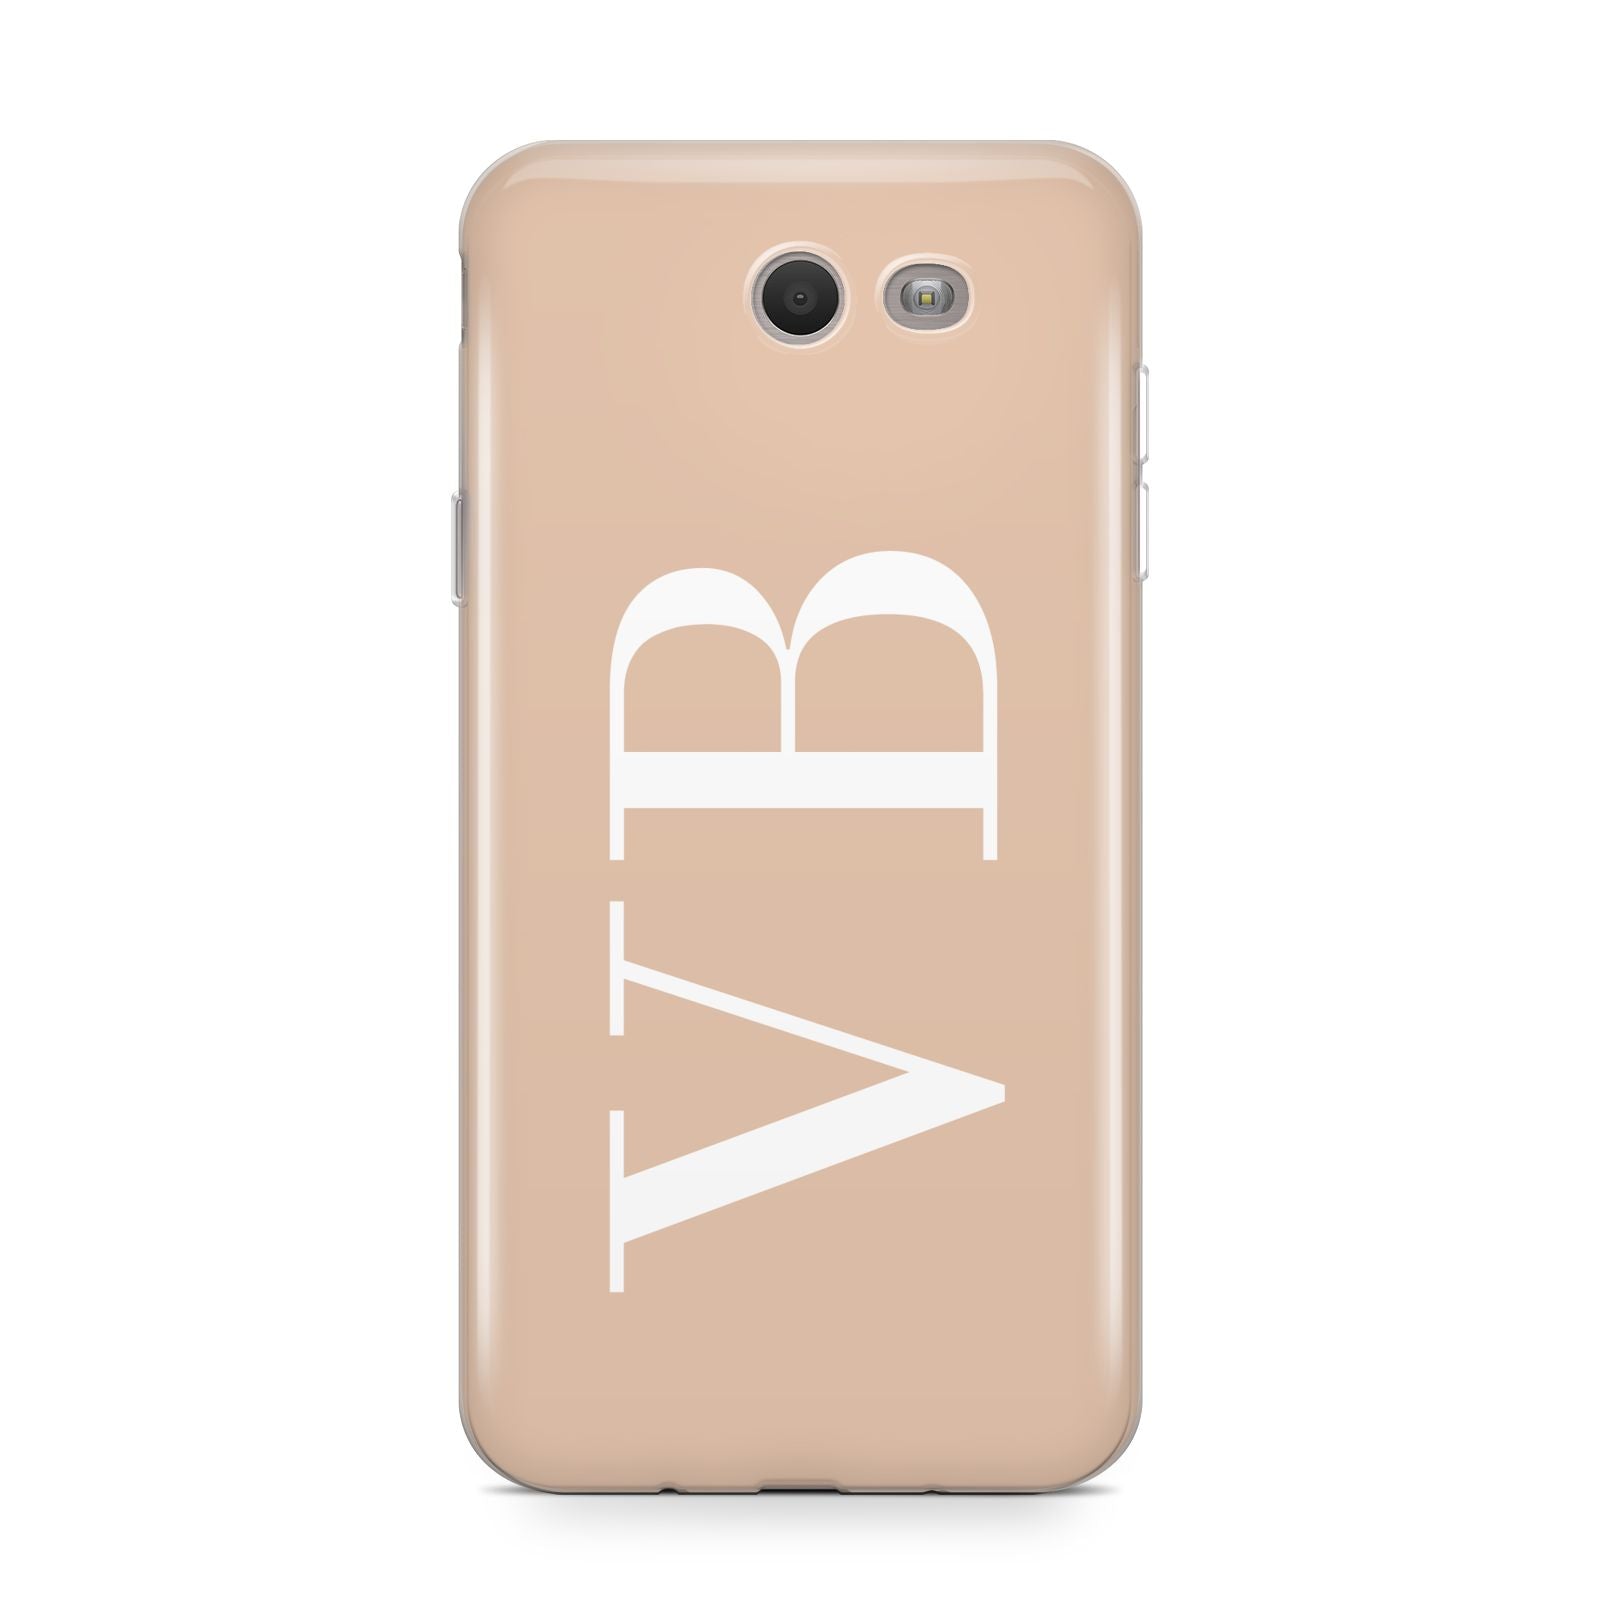 Nude And White Personalised Samsung Galaxy J7 2017 Case